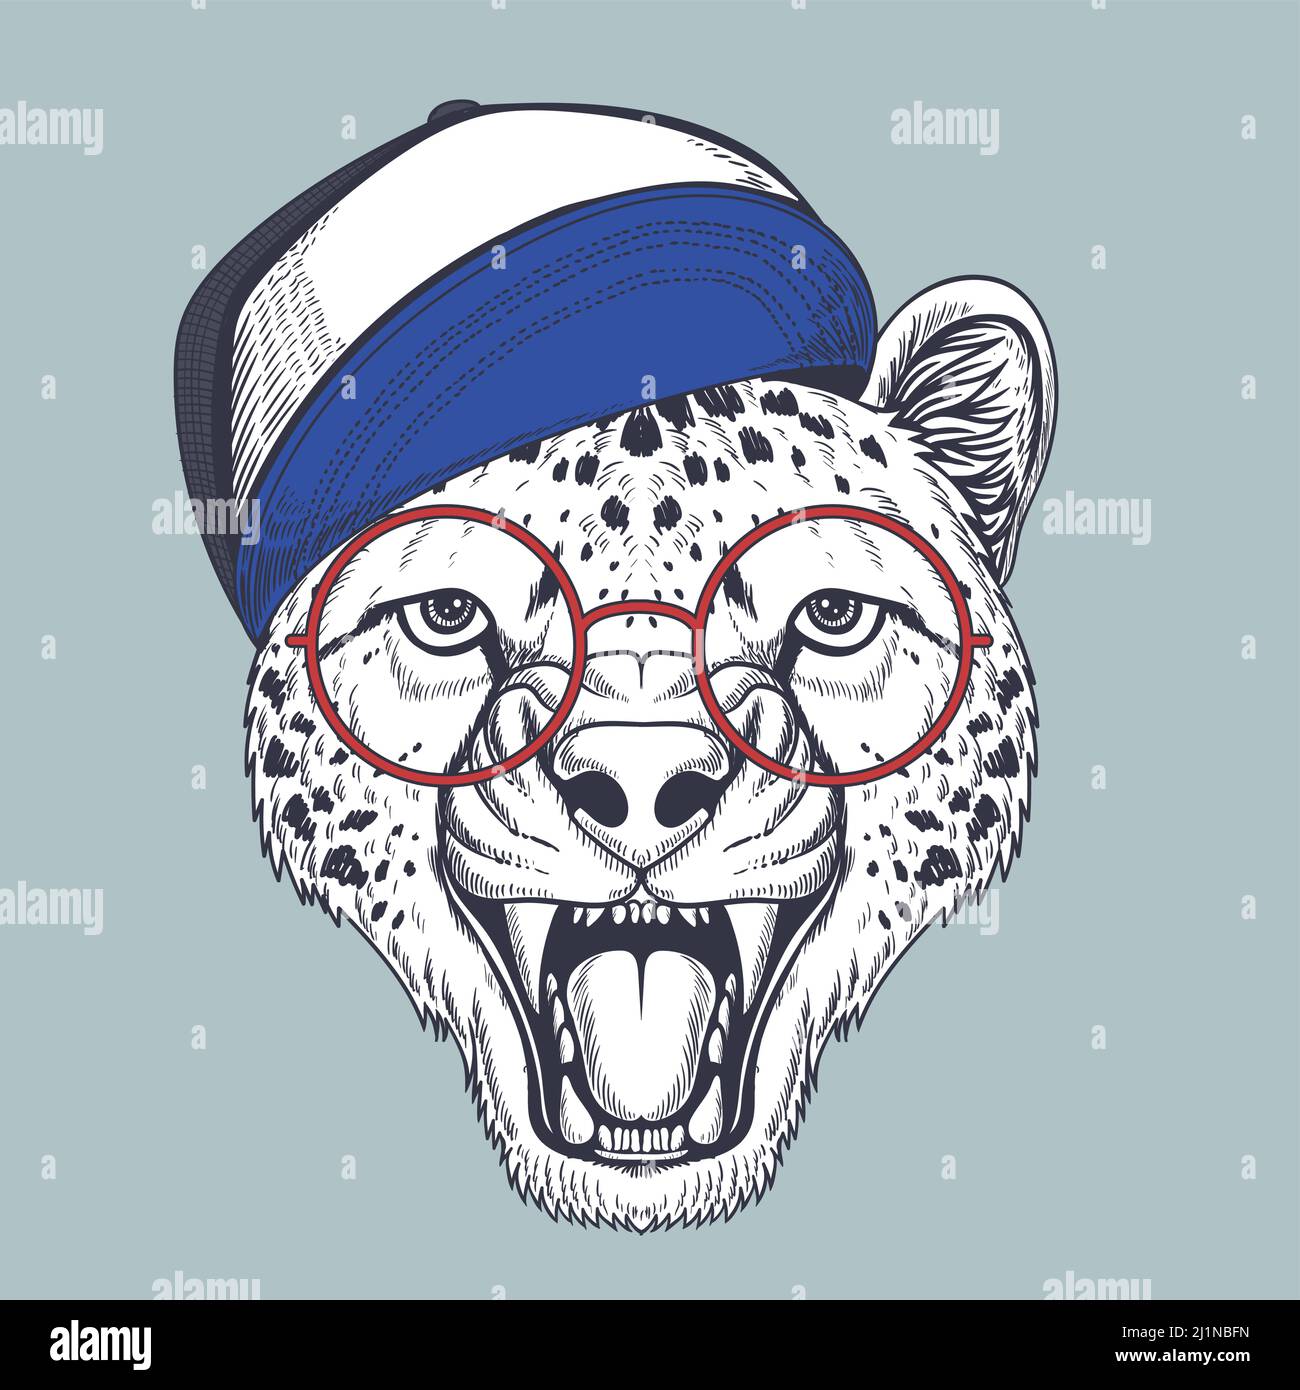 Cheetah Hand drawn wearing a red glasses and hat Stock Vector Image ...